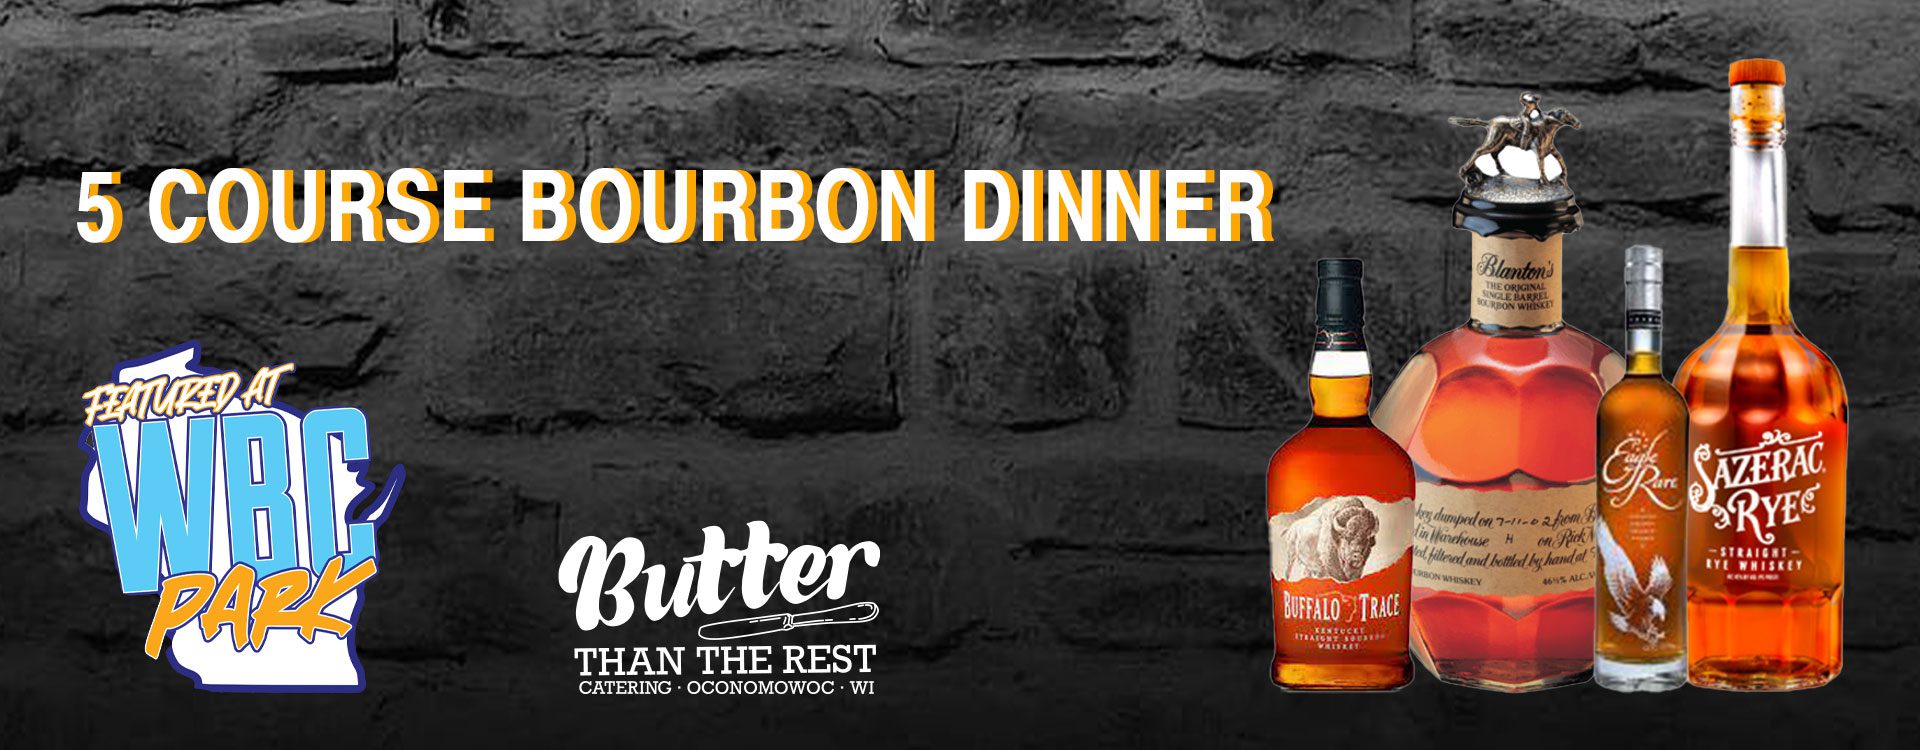 Bourbon dinner featured at WBC Park, presented by Butter Than The Rest Catering